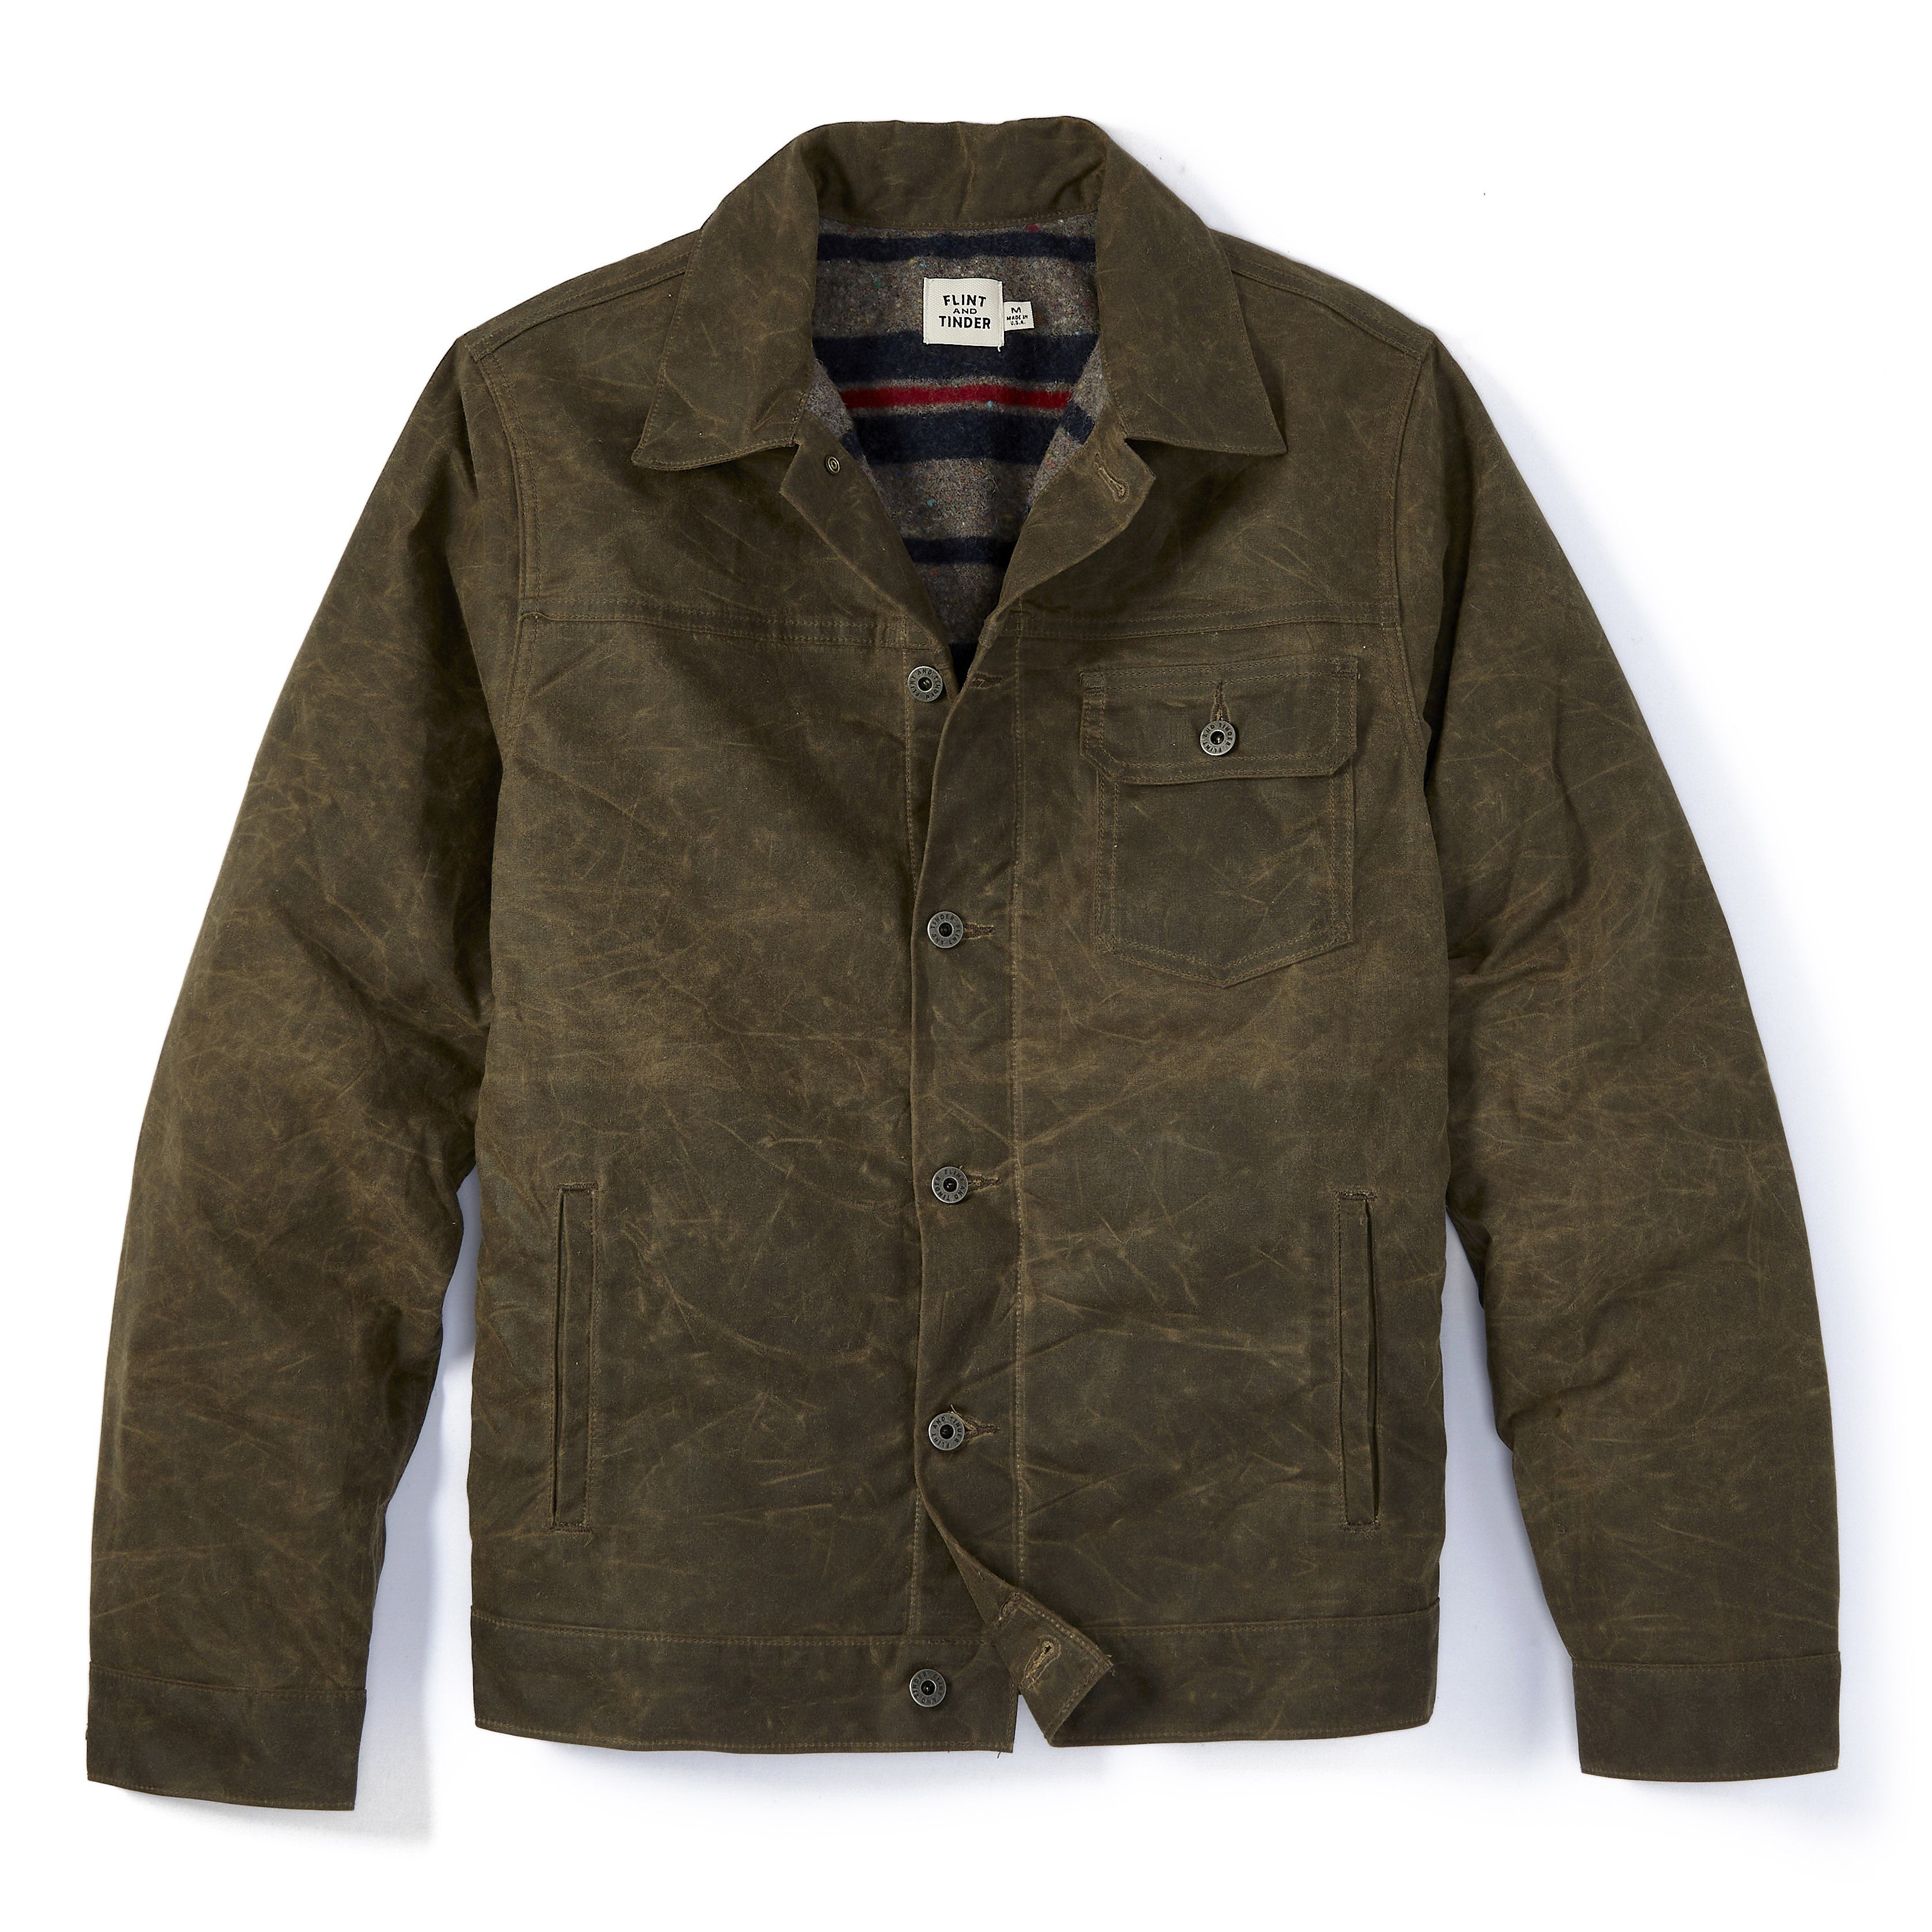 This Waxed Canvas Jacket Is Perfect for Cold Weather (and It's $50 Off)